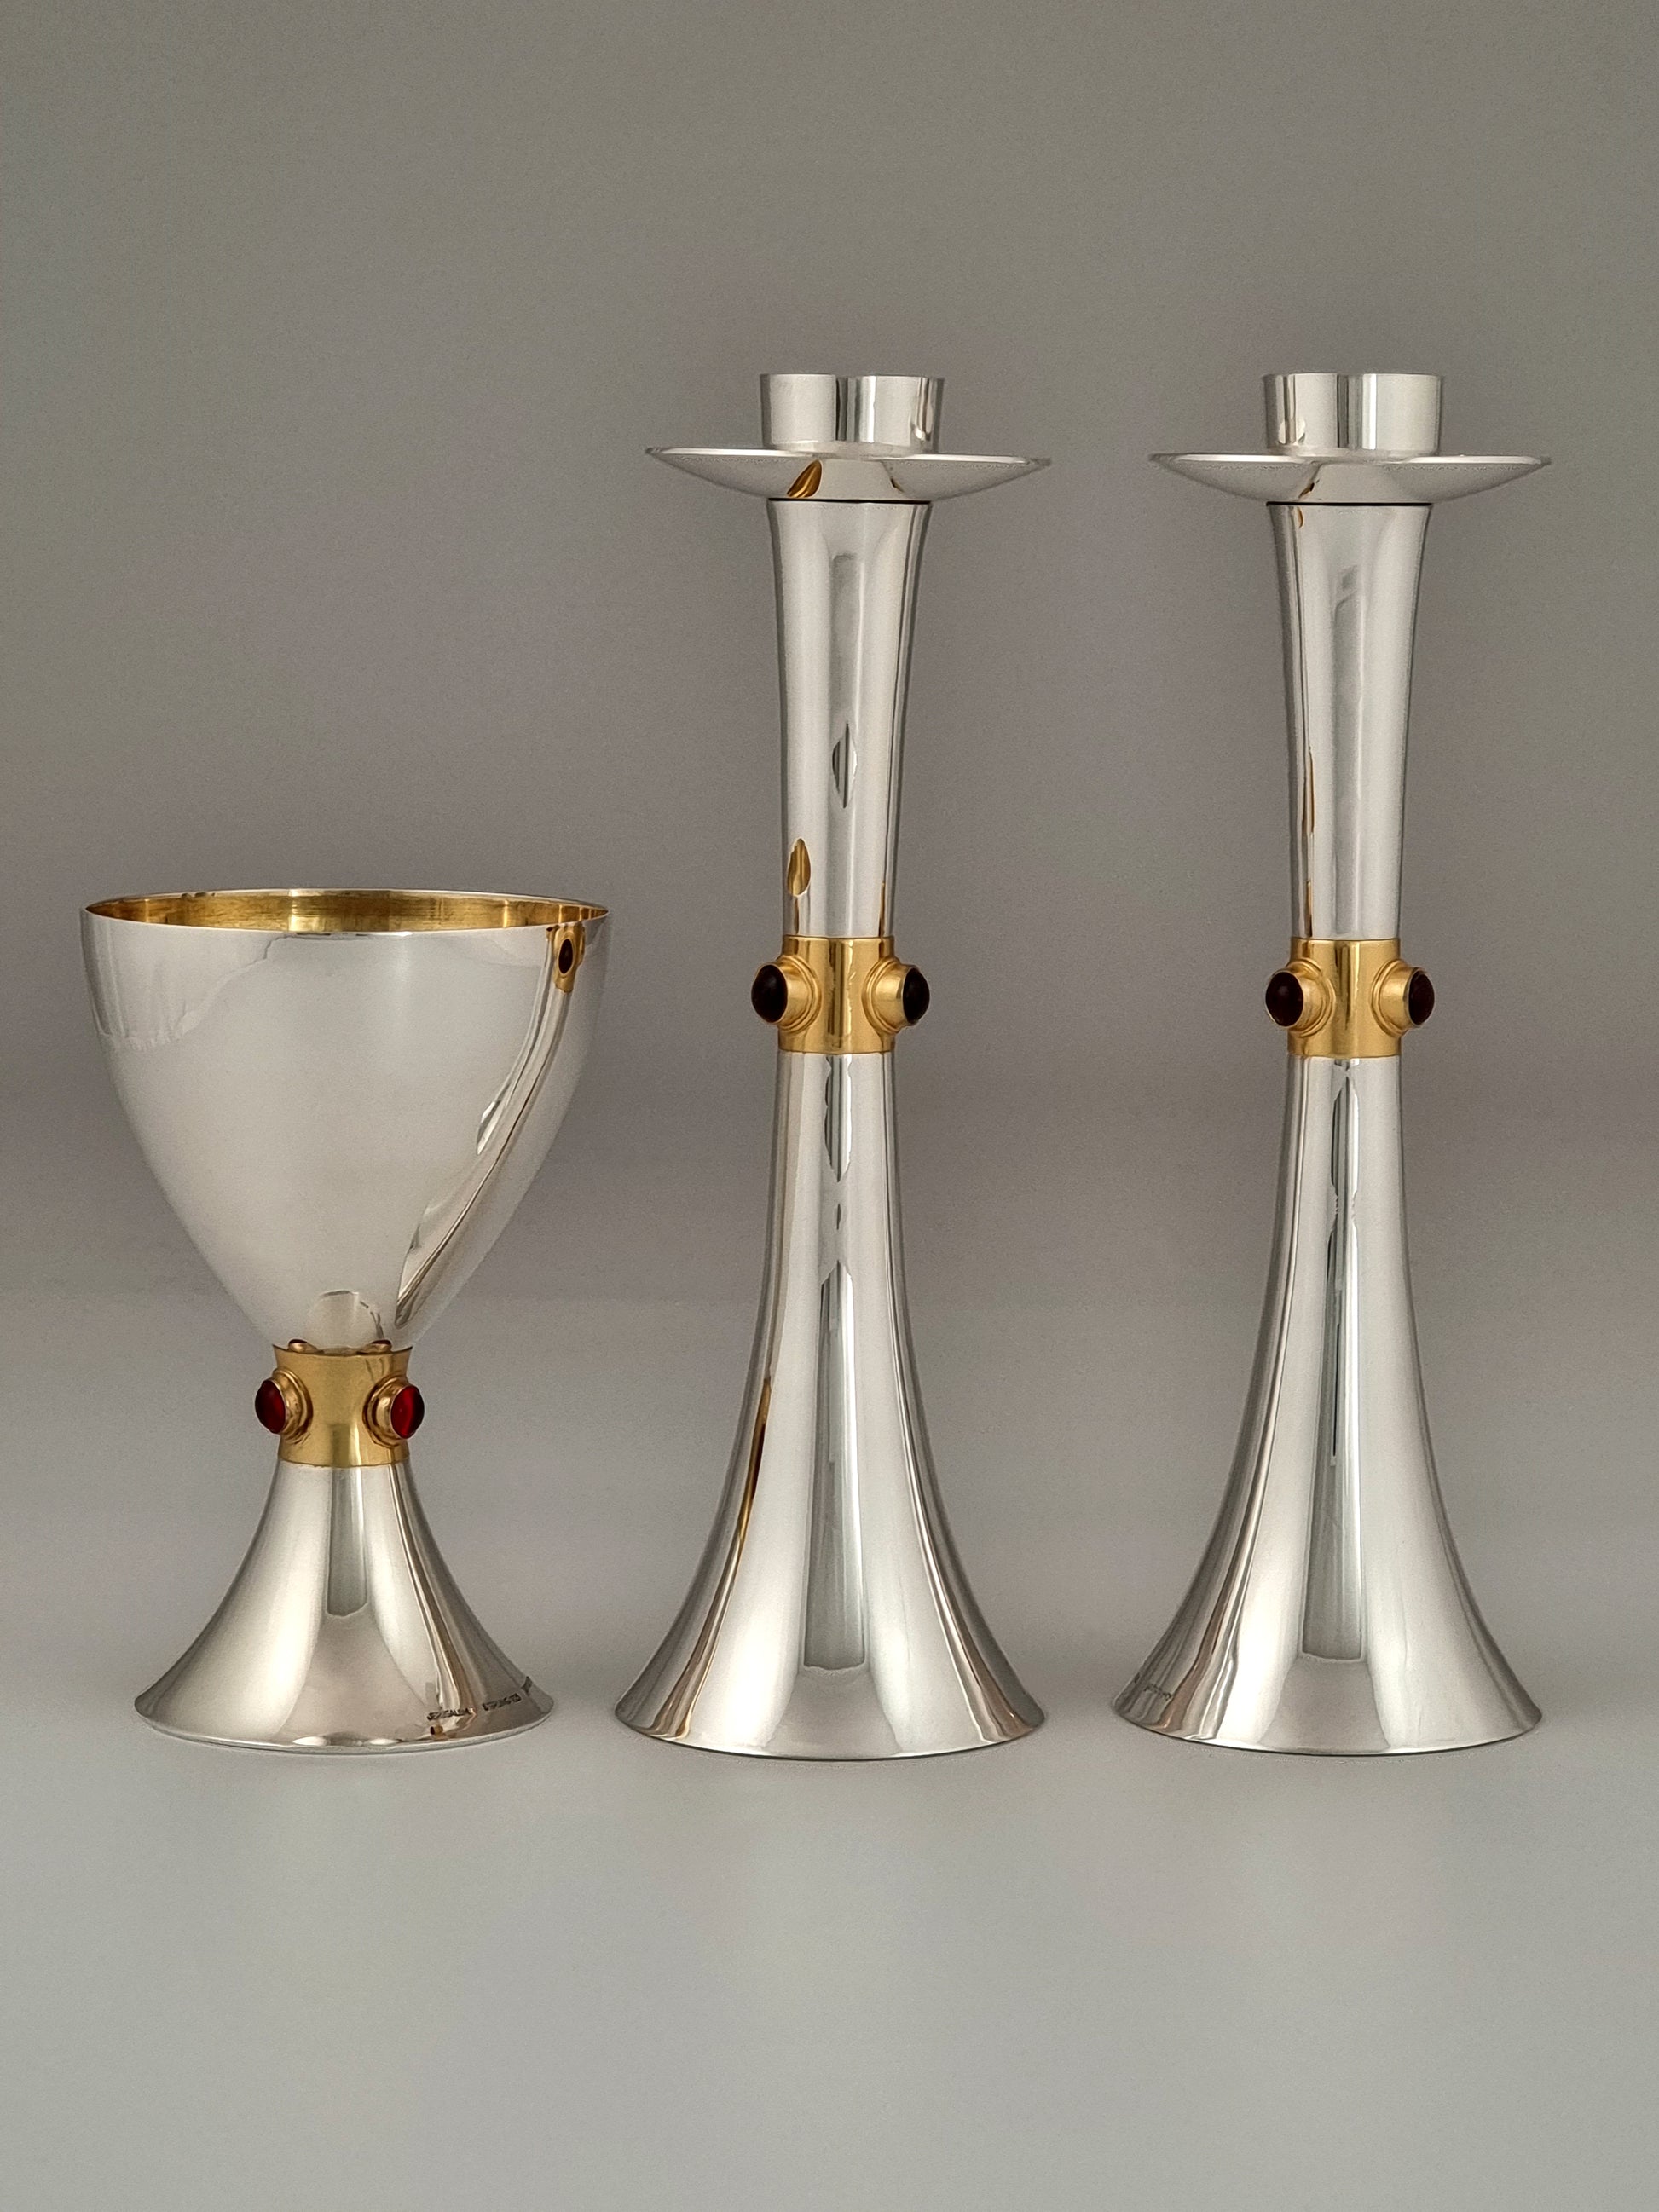 Yemini Judaica set made of 925 sterling silver with gold plated bands and garnets made by Yemini silversmiths in Jerusalem